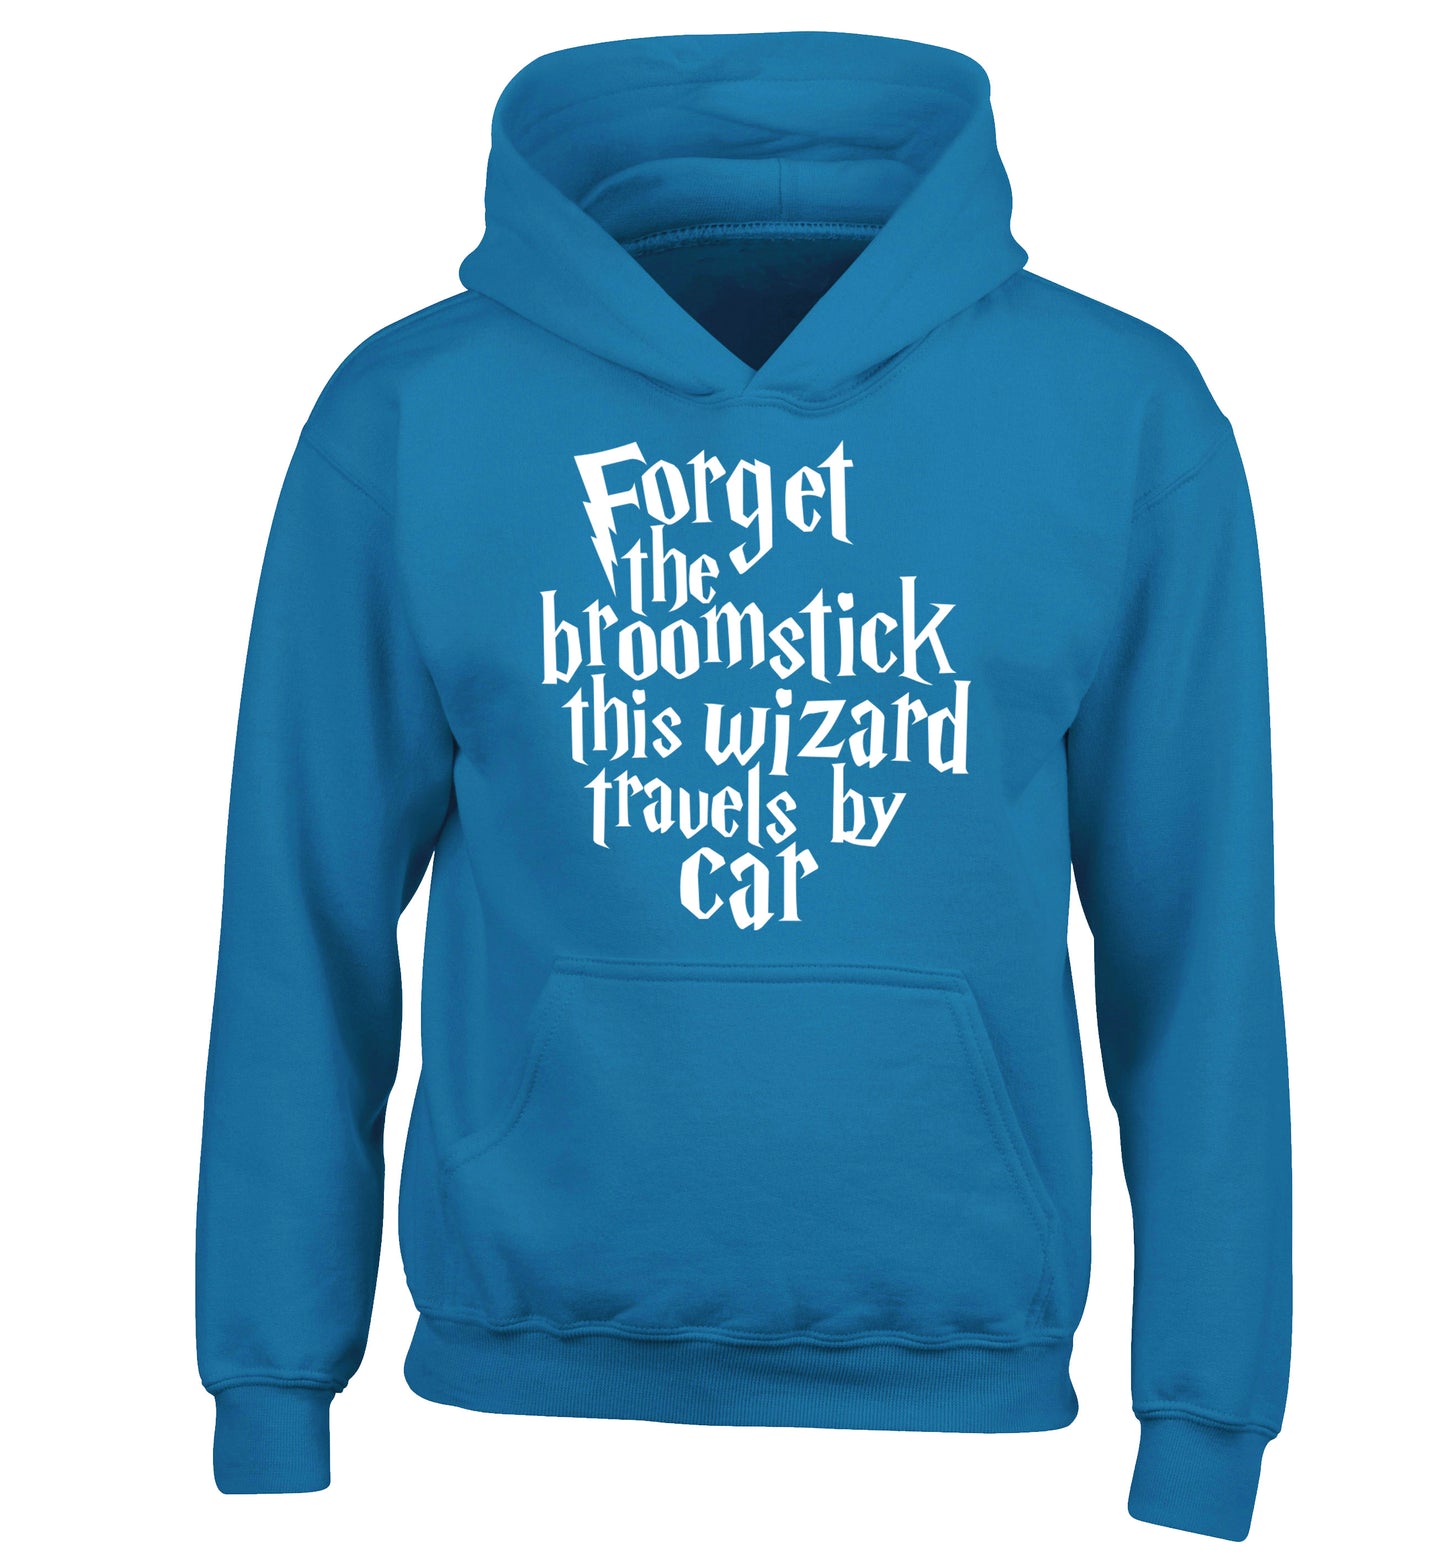 Forget the broomstick this wizard travels by car children's blue hoodie 12-14 Years